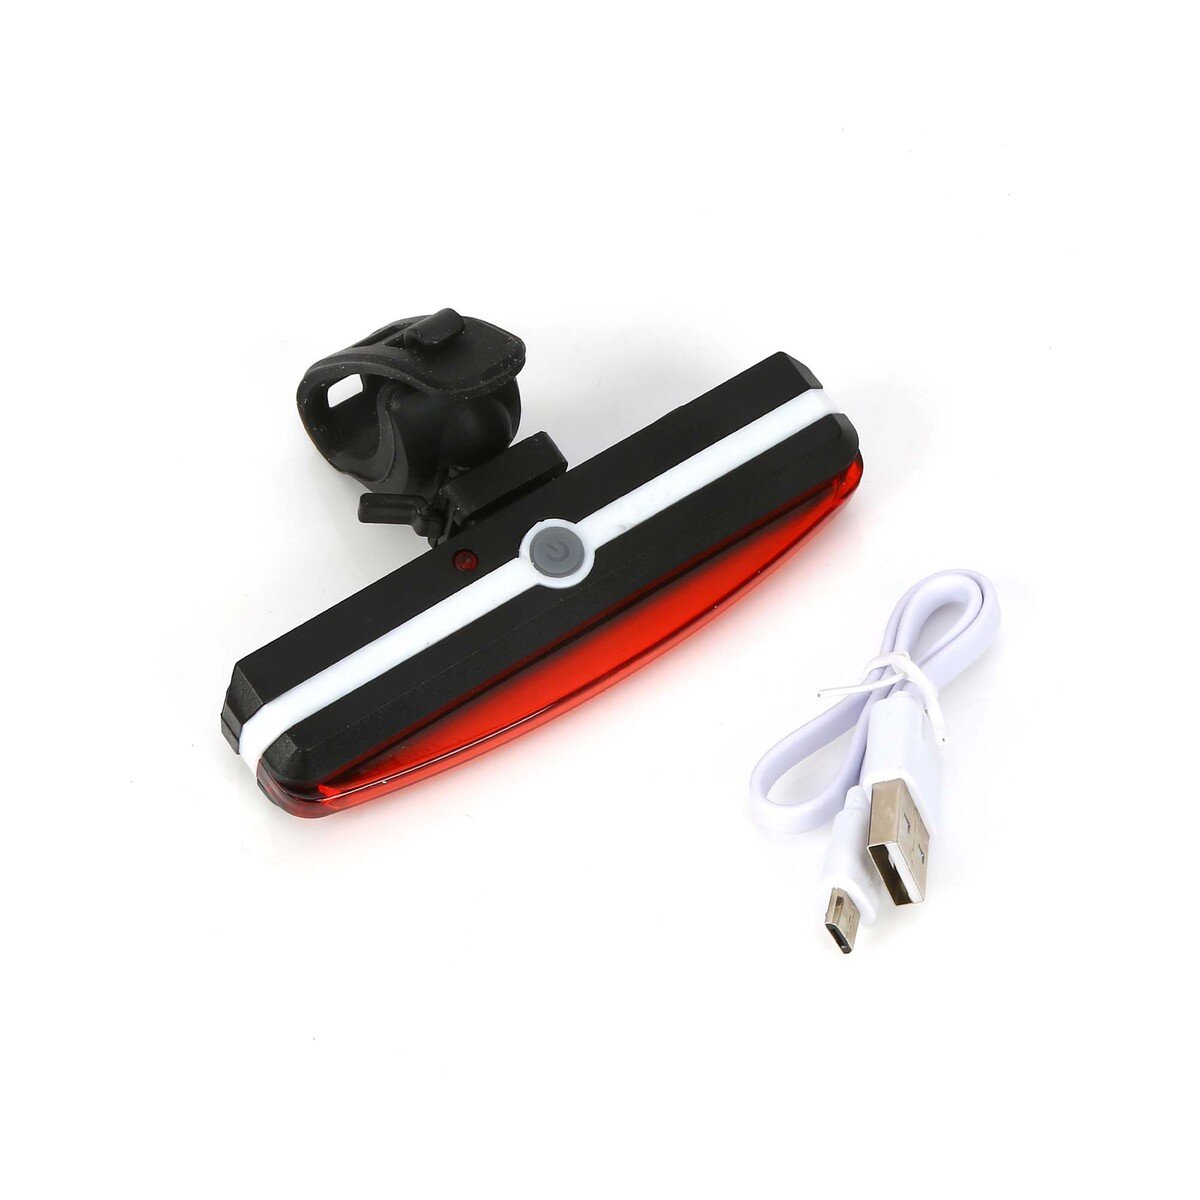 Sports-Champion Rechargable Bicycle USB Lamp